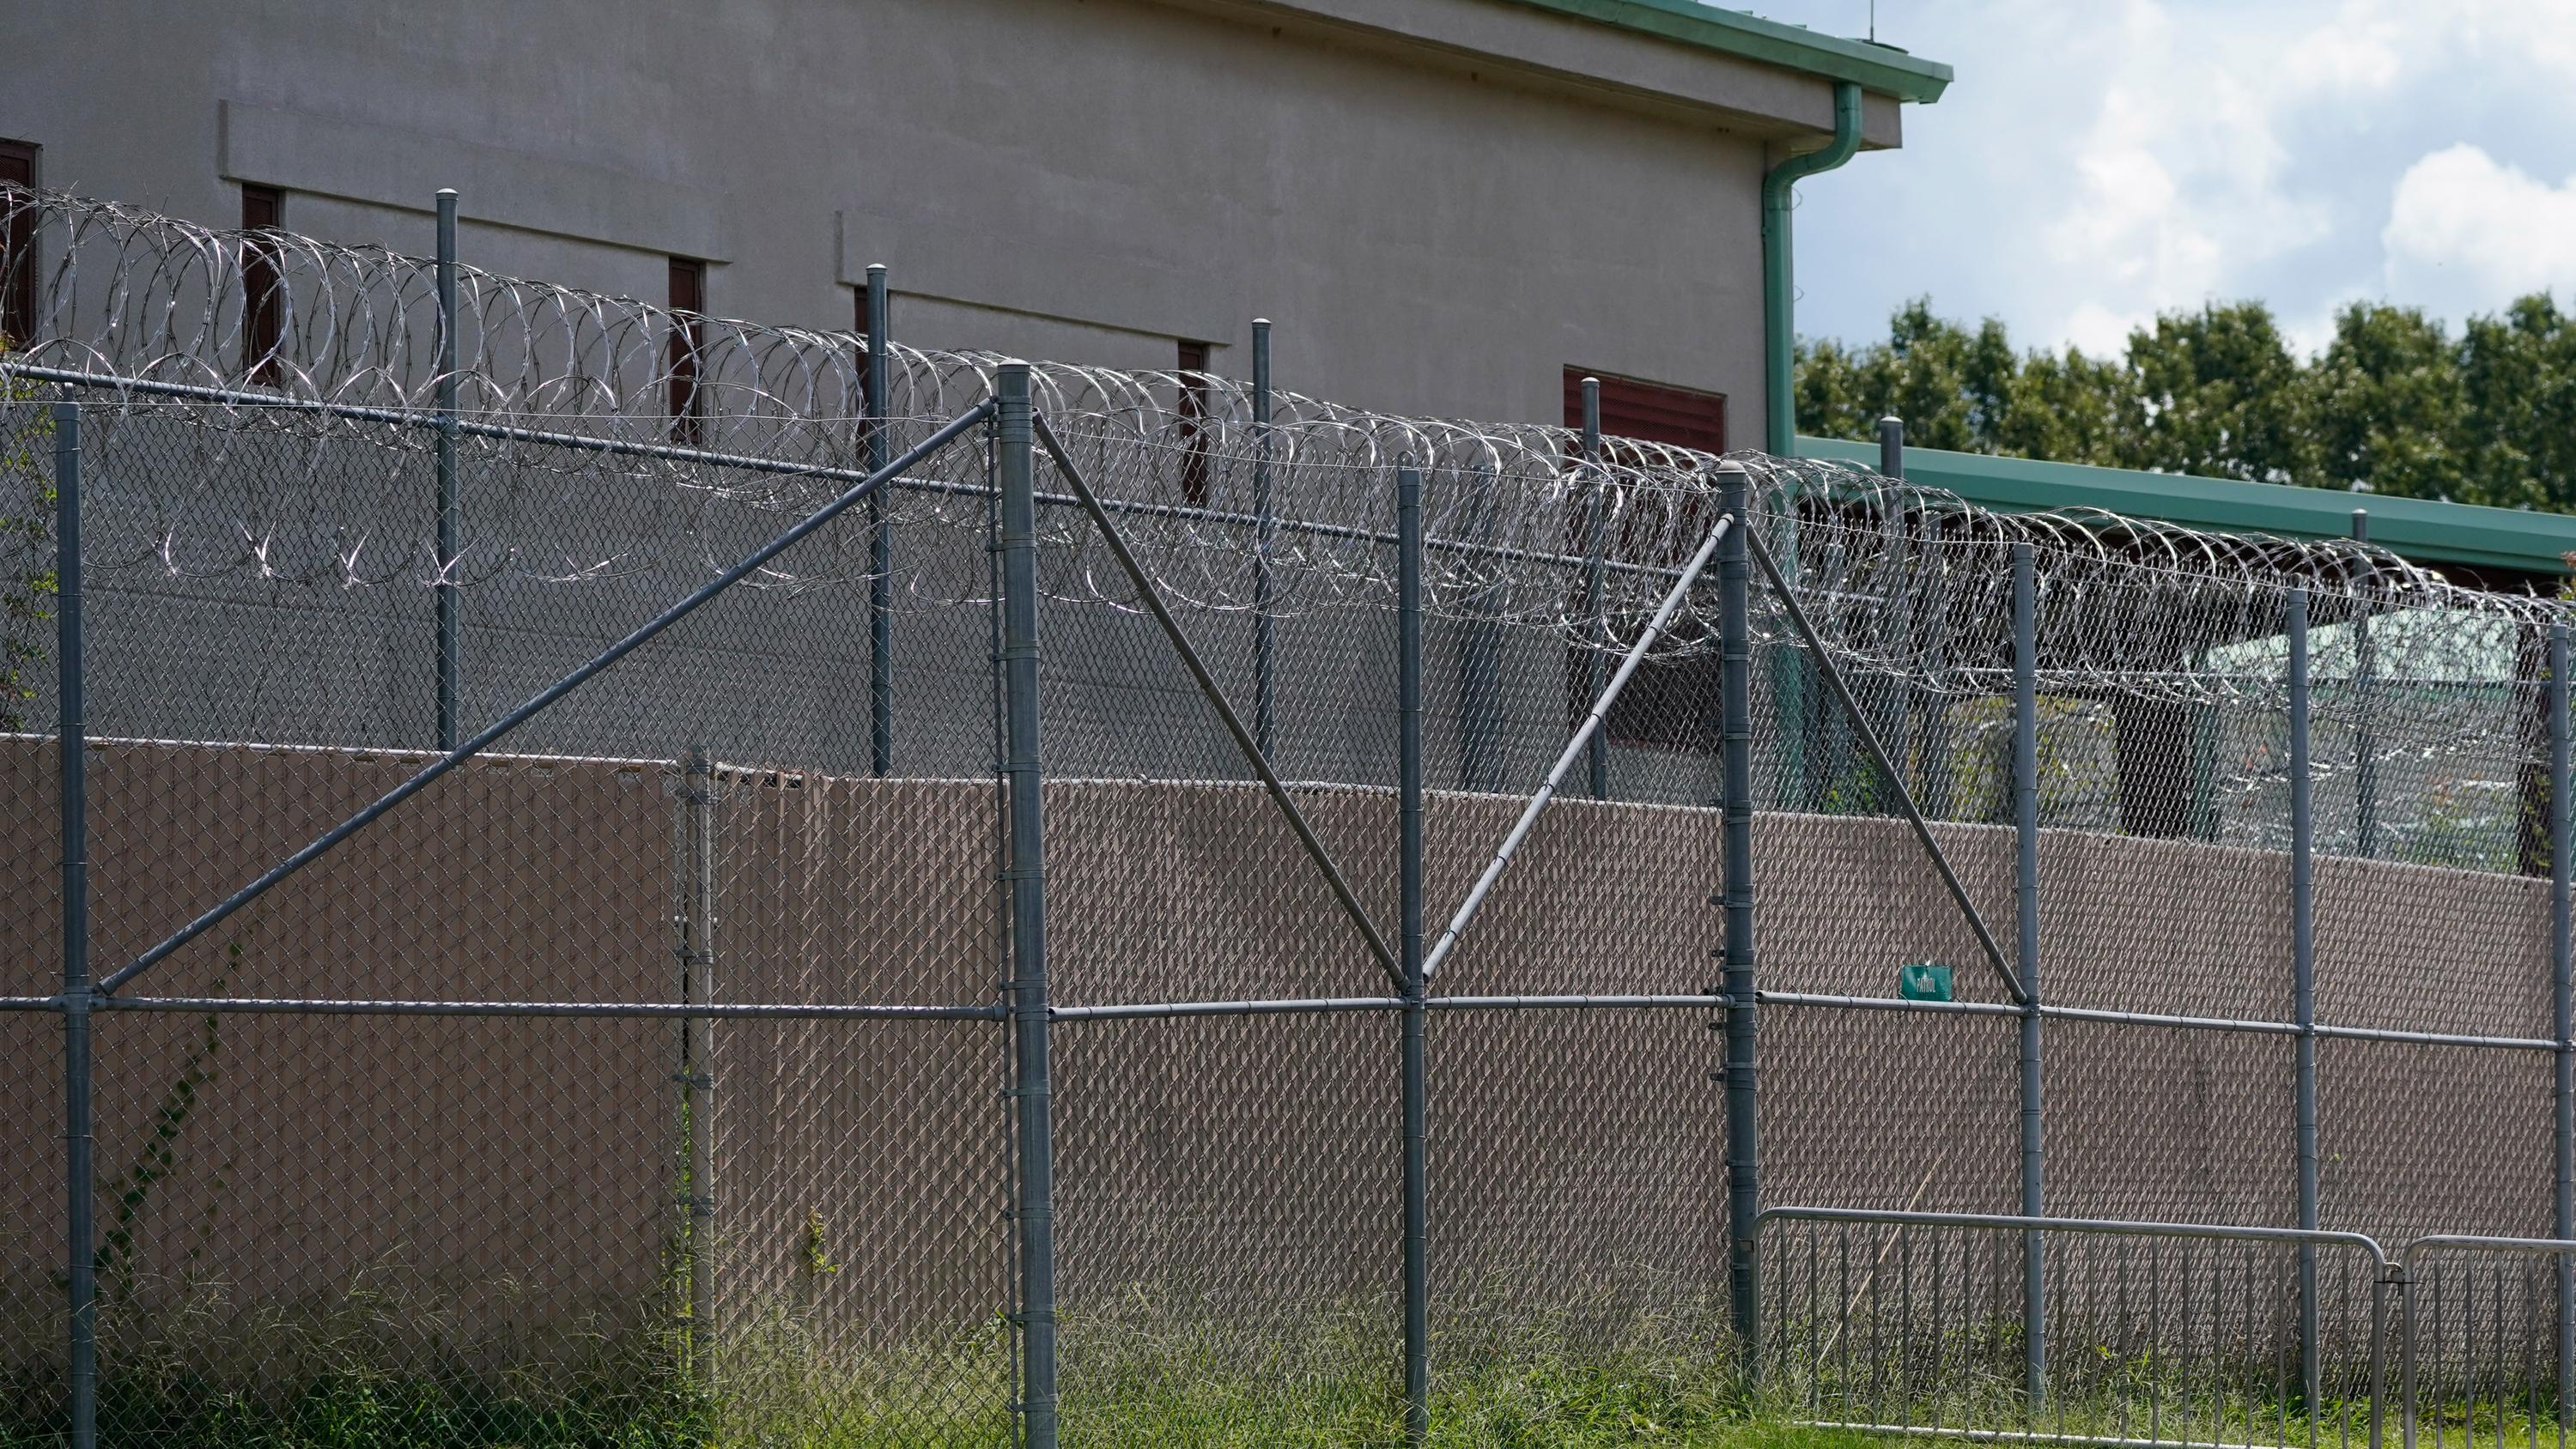 A gray detention center with pale green gutters, behind a barbed wire fence.